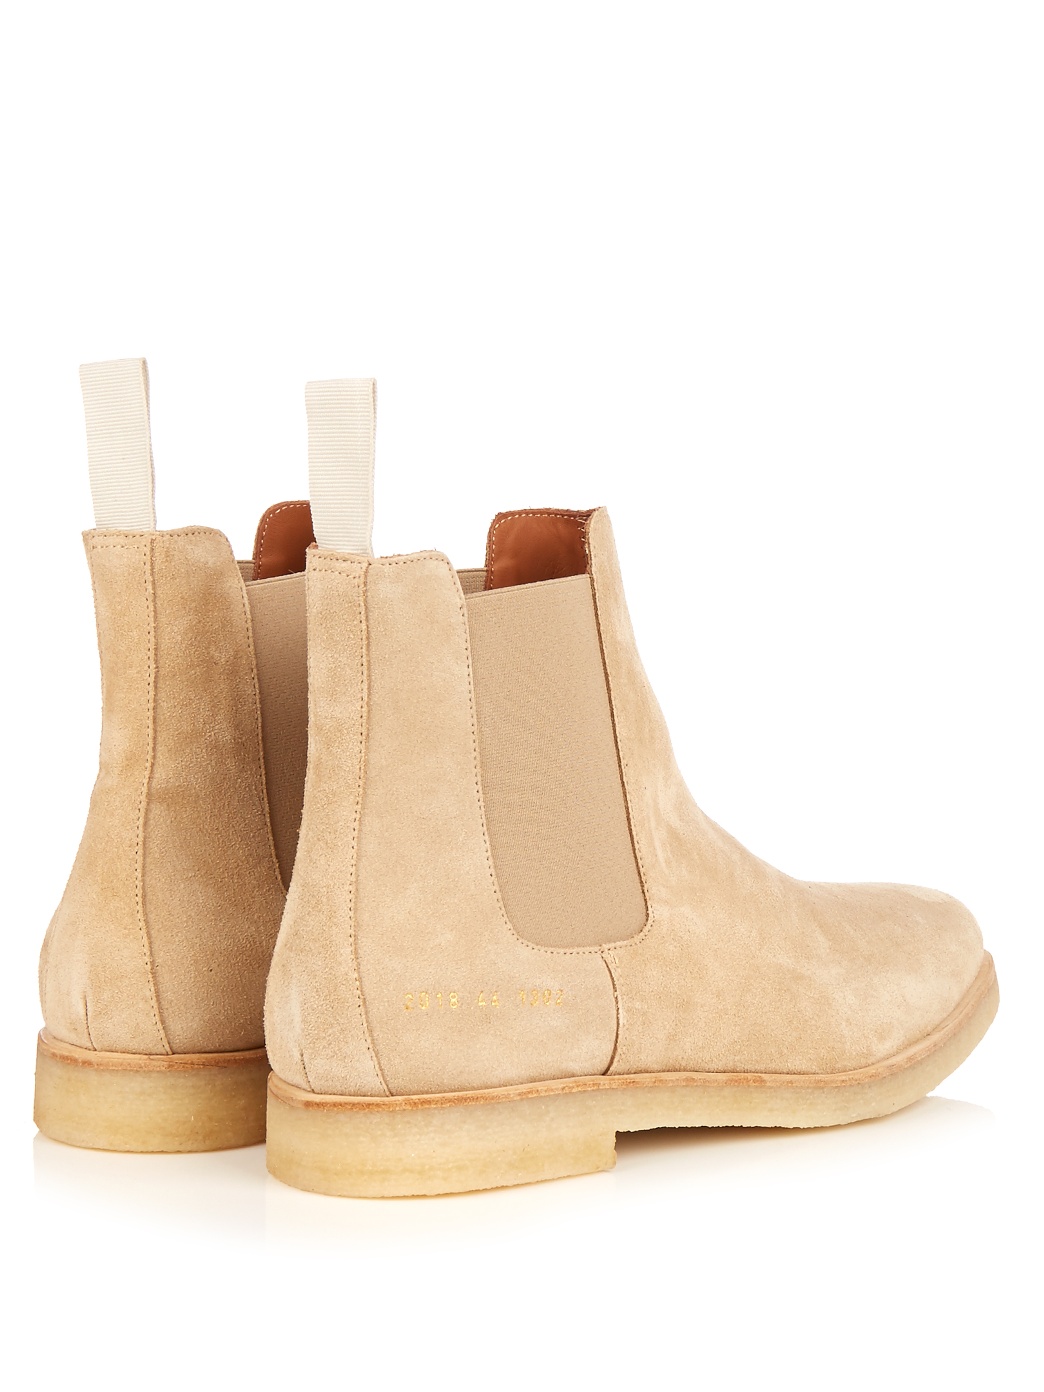 Common Projects Suede Chelsea Boots 4.jpg